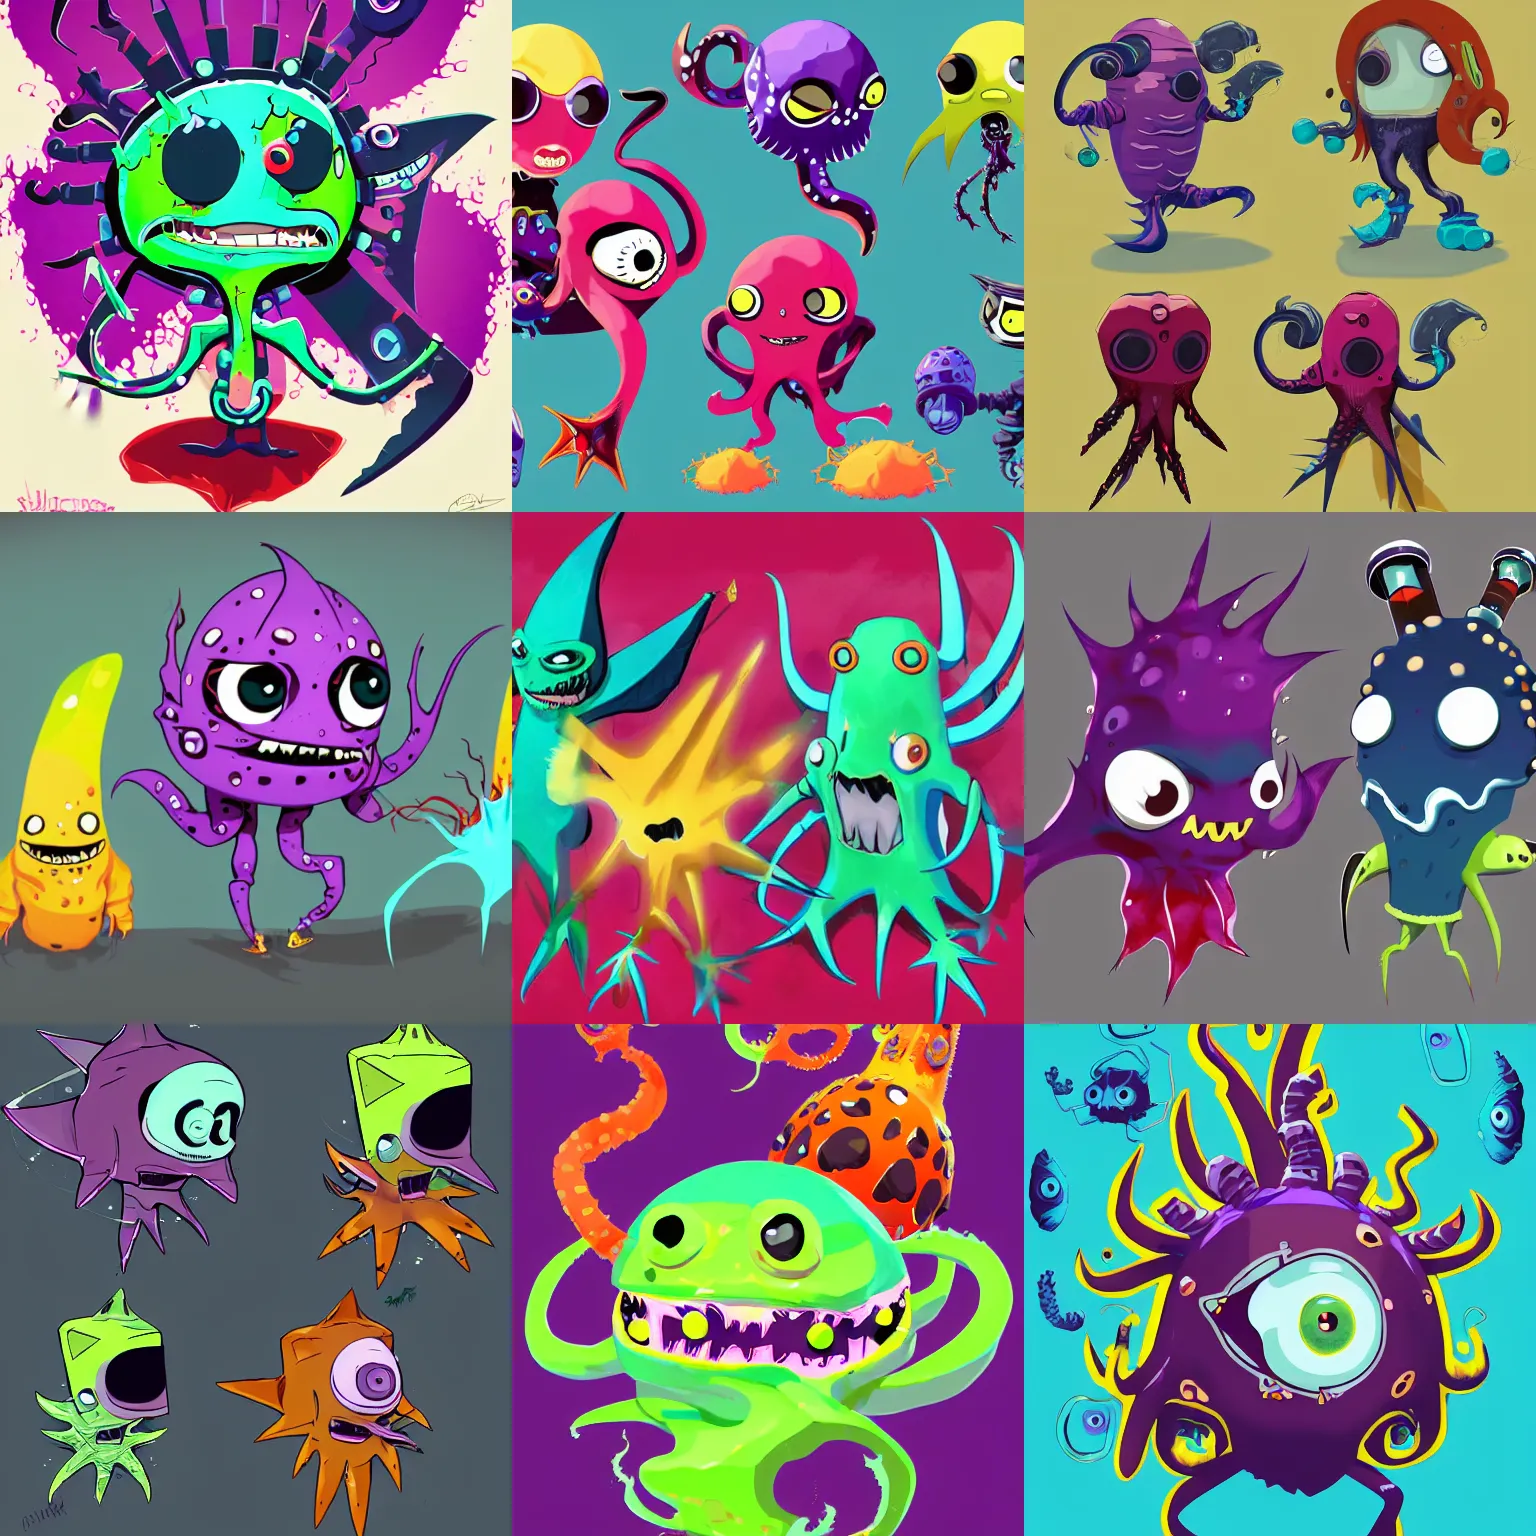 Prompt: psychic punk rocker vampiric electrifying rockstar vampire squid angler fish gulper eel and sea urchins concept character designs of various shapes and sizes by genndy tartakovsky and splatoon by nintendo and the psychonauts franchise by doublefine tim shafer artists for the new hsplatoon video game by nintendo